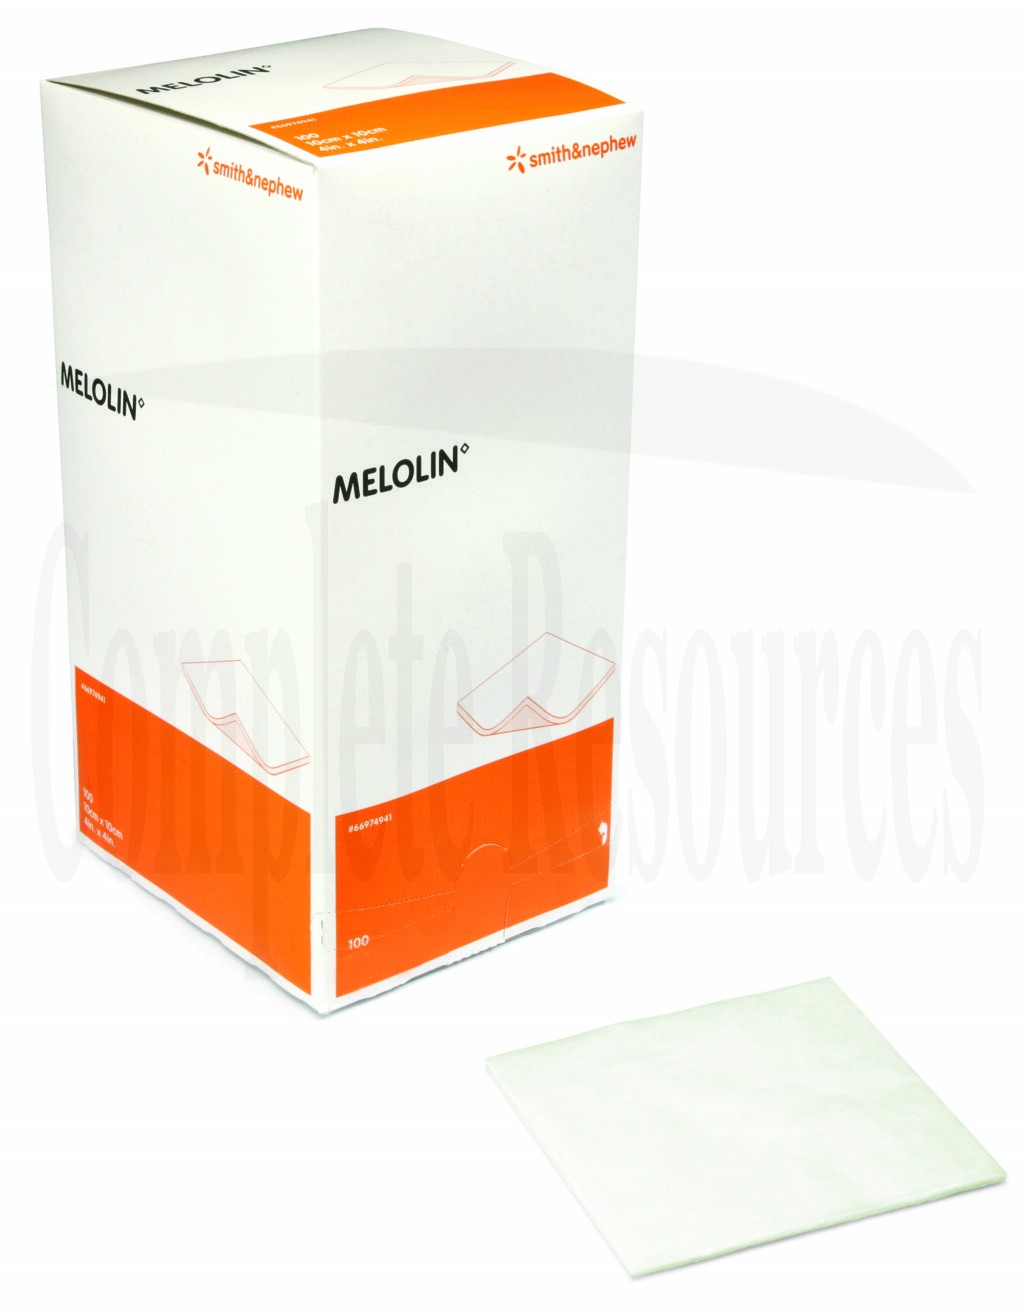 Melolin 5cm x 5cm Low Adherent Dressing Sterile Highly Absorbent 